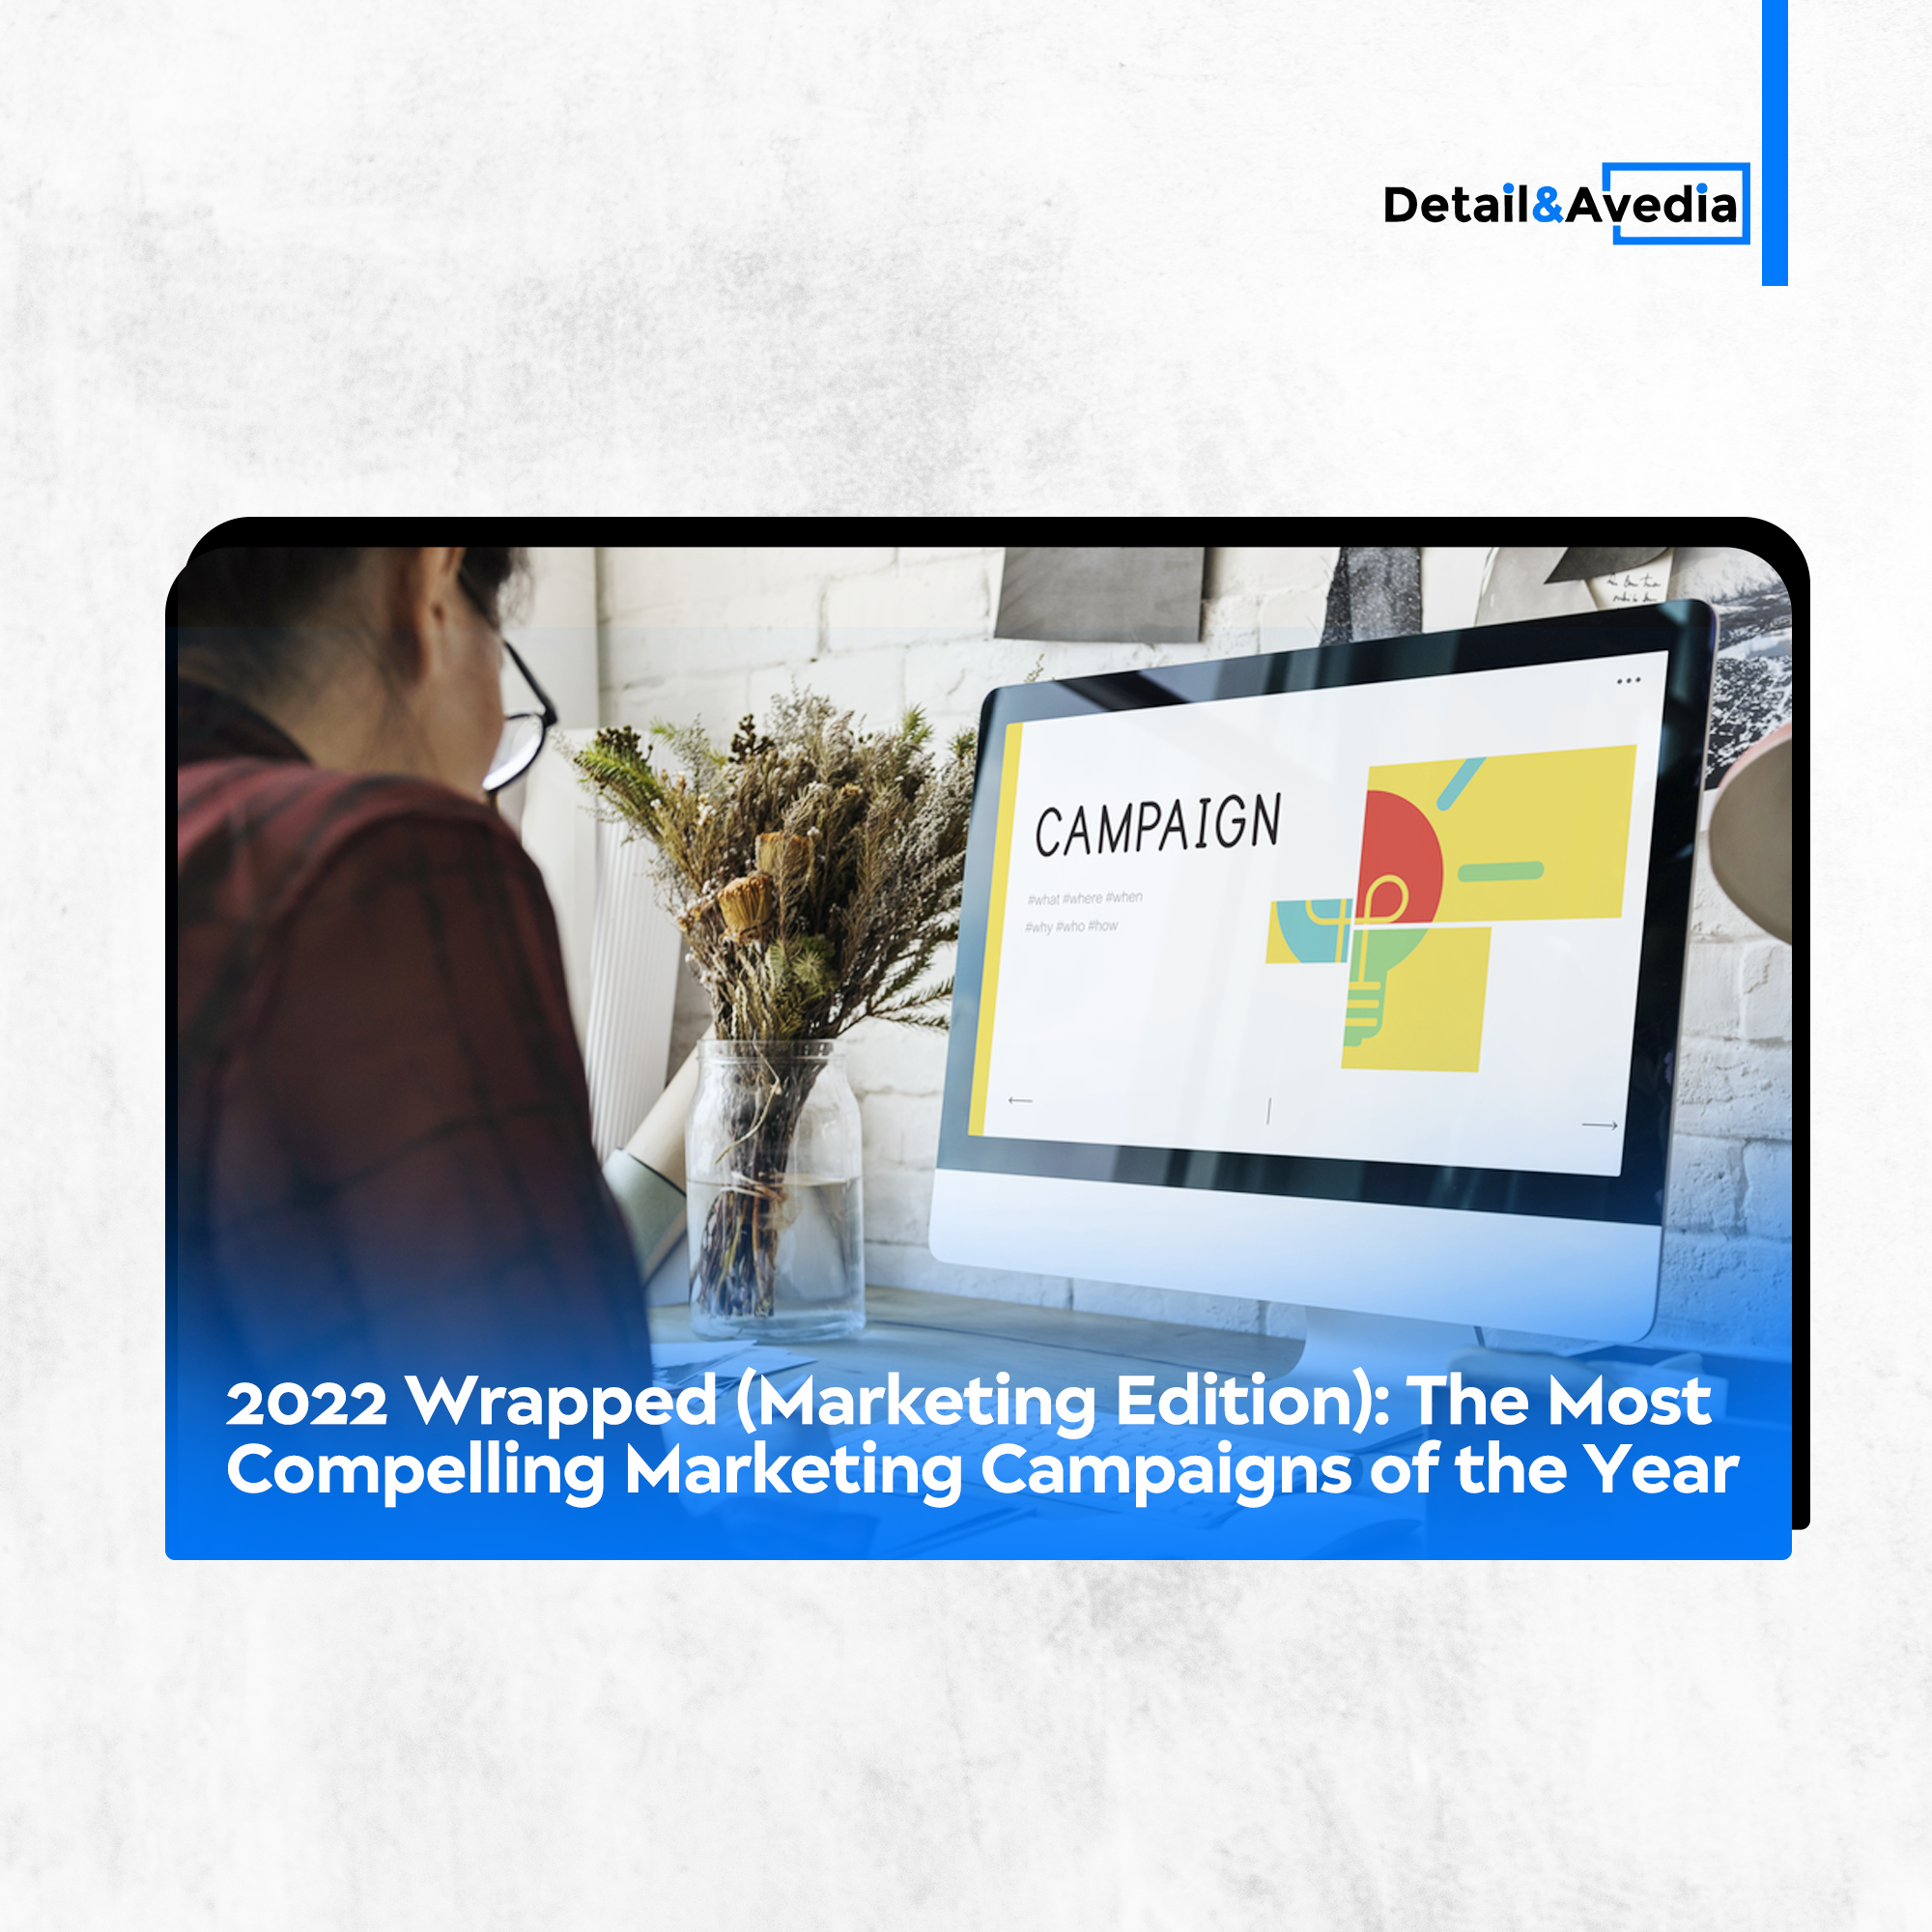 2022 Wrapped (Marketing Edition): The Most Compelling Marketing Campaigns of the Year